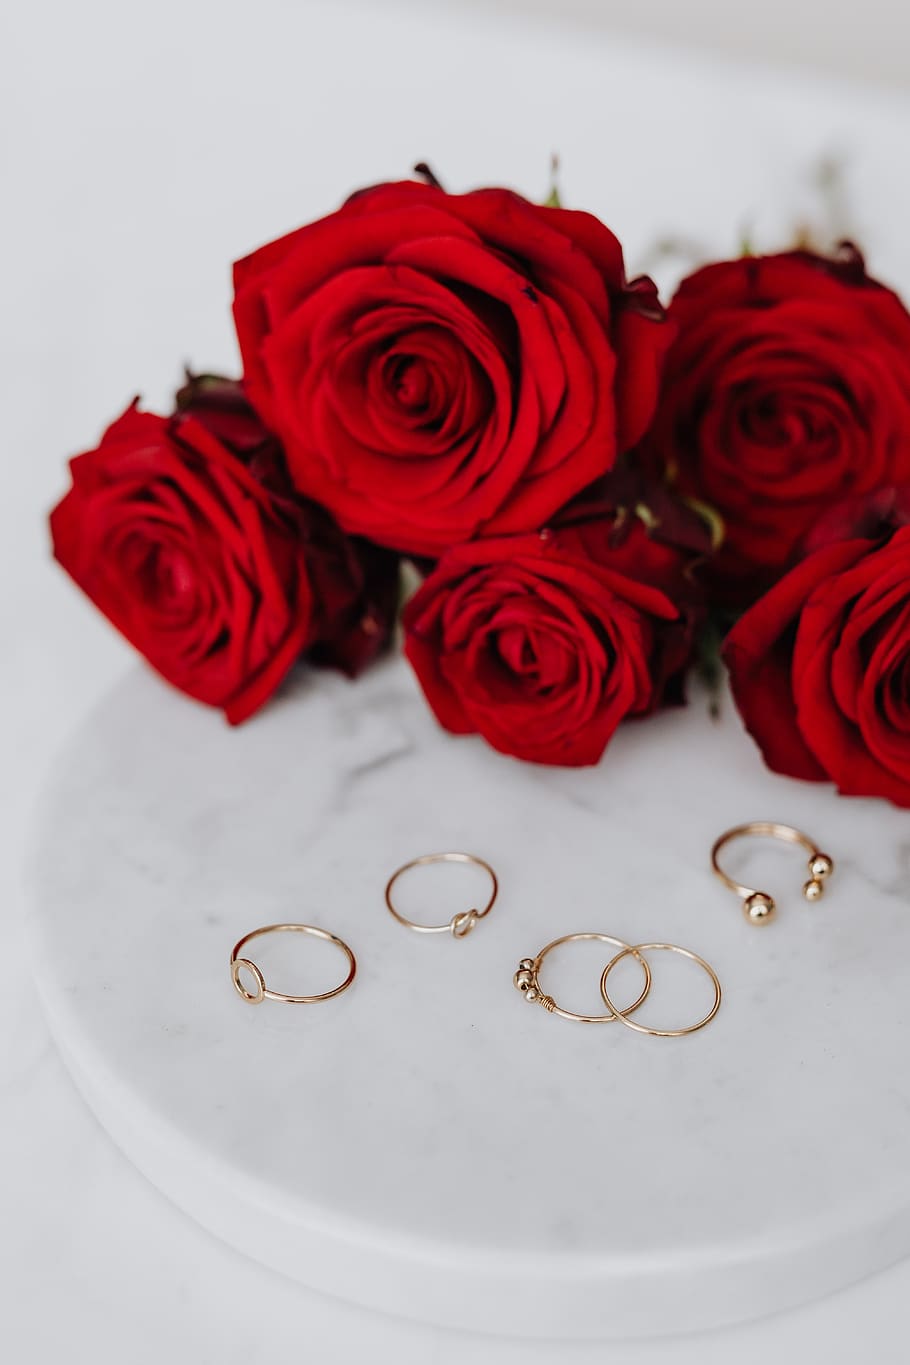 roses, jewellery, beauty, accesories, red roses, jewelery, gold, golden, essentials, marble